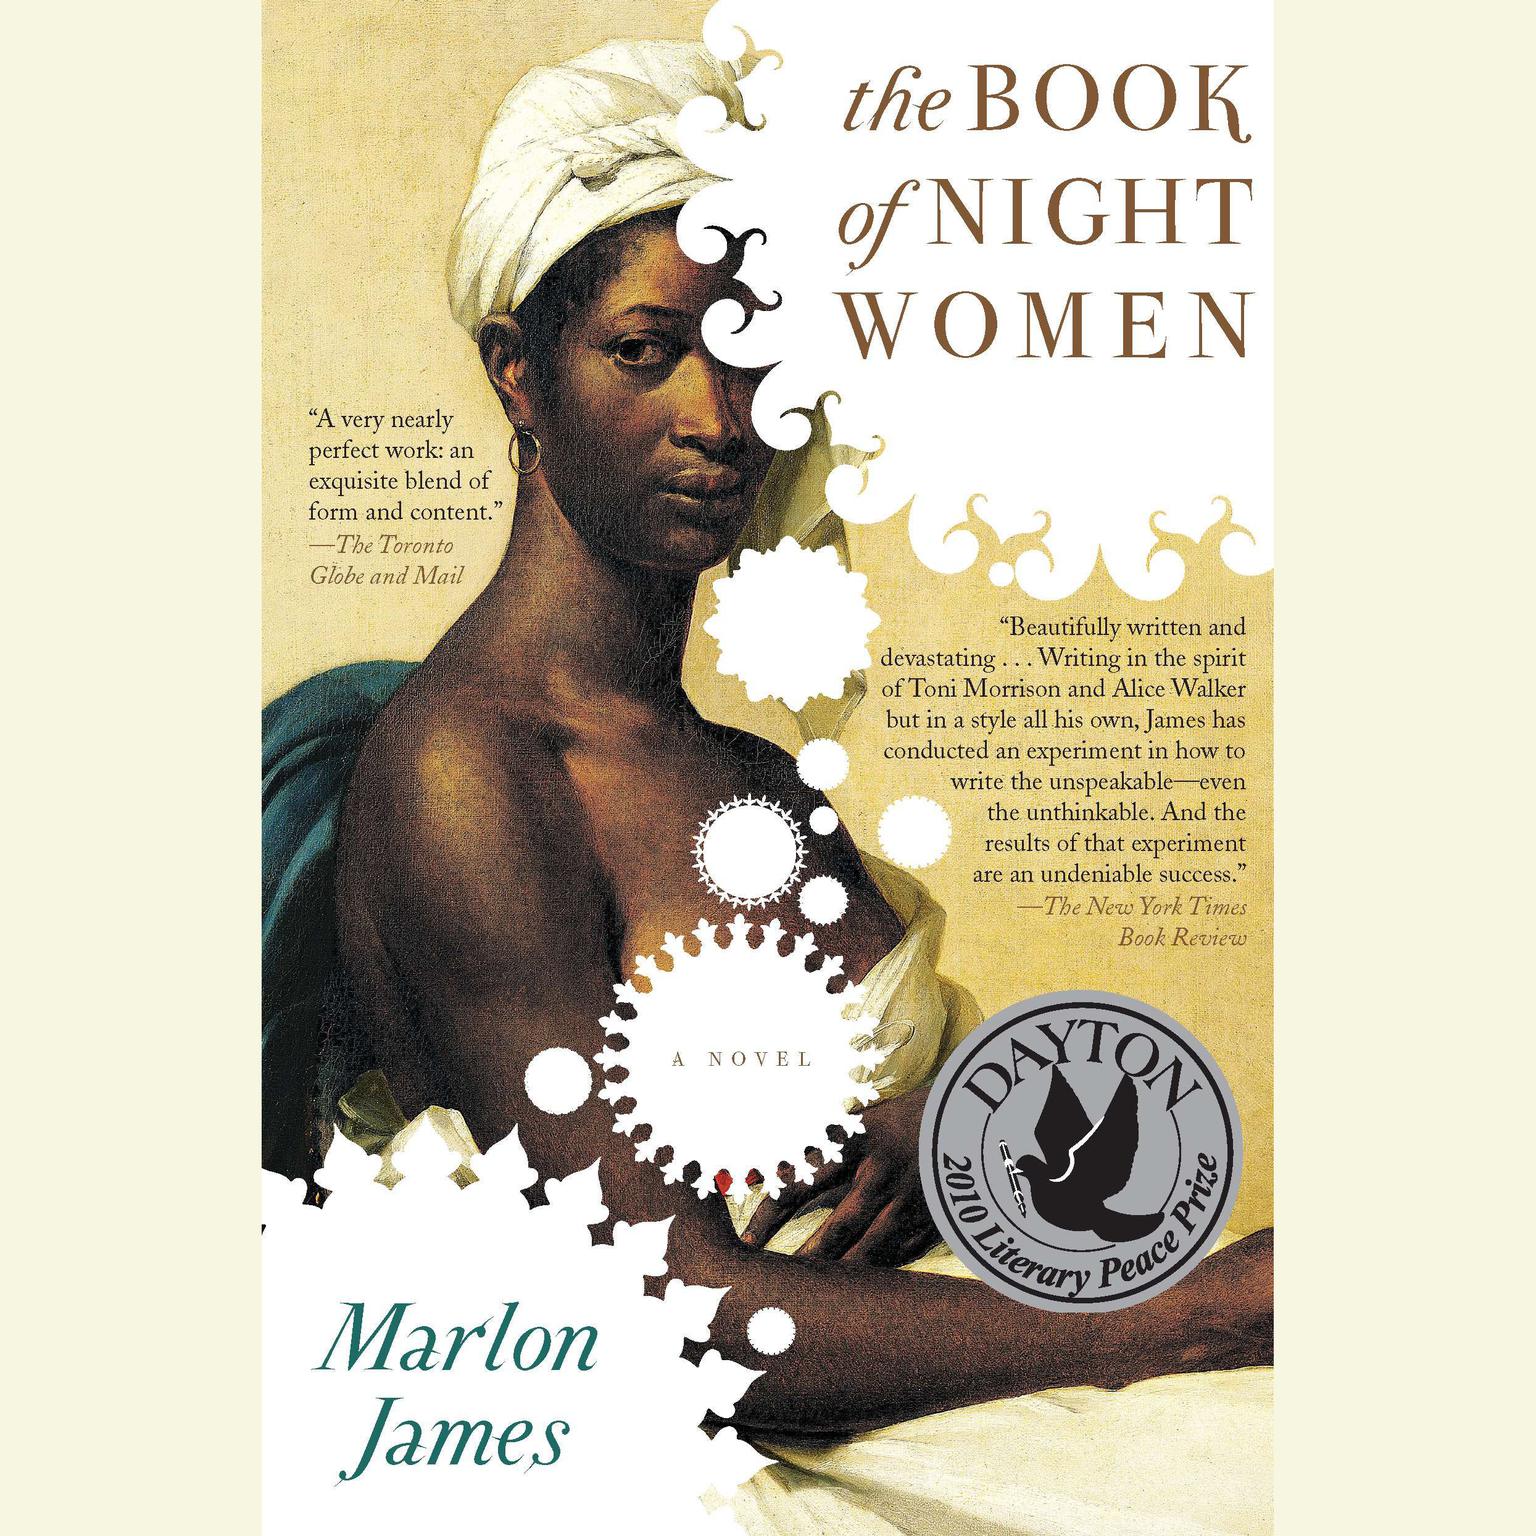 The Book of Night Women Audiobook, by Marlon James